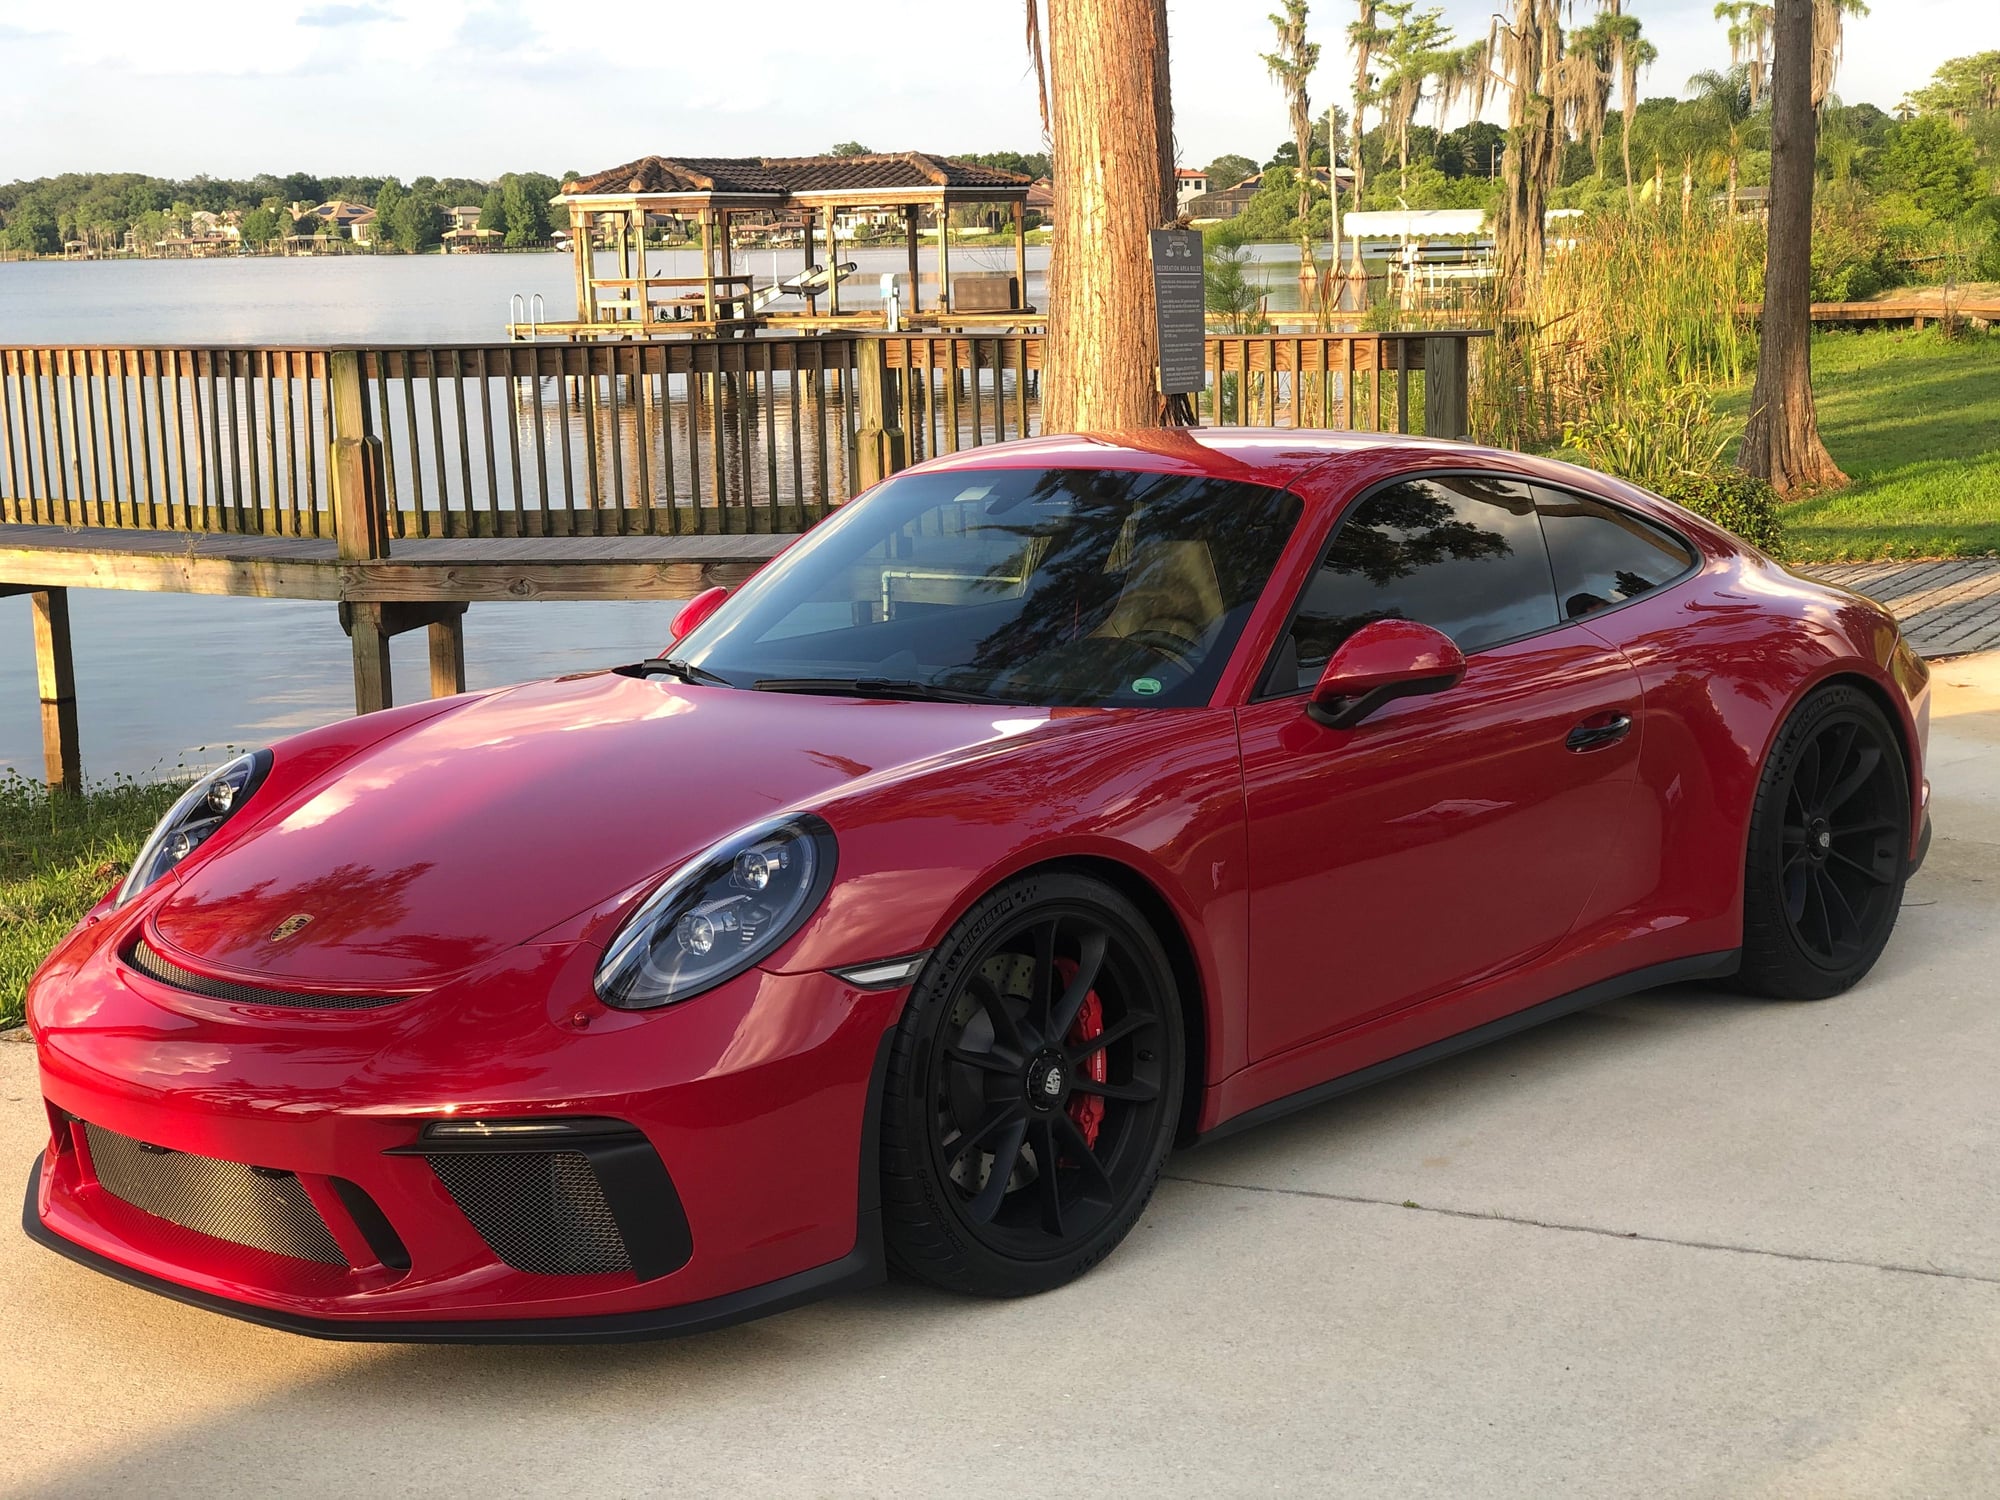 2018 Porsche GT3 - 2018 GT3 Touring, Premium Carmine Red, 1375 Miles, CPO Through 11/2024 - Used - VIN WP0AC2A93JS176809 - 2WD - Manual - Coupe - Red - Orlando, FL 34786, United States